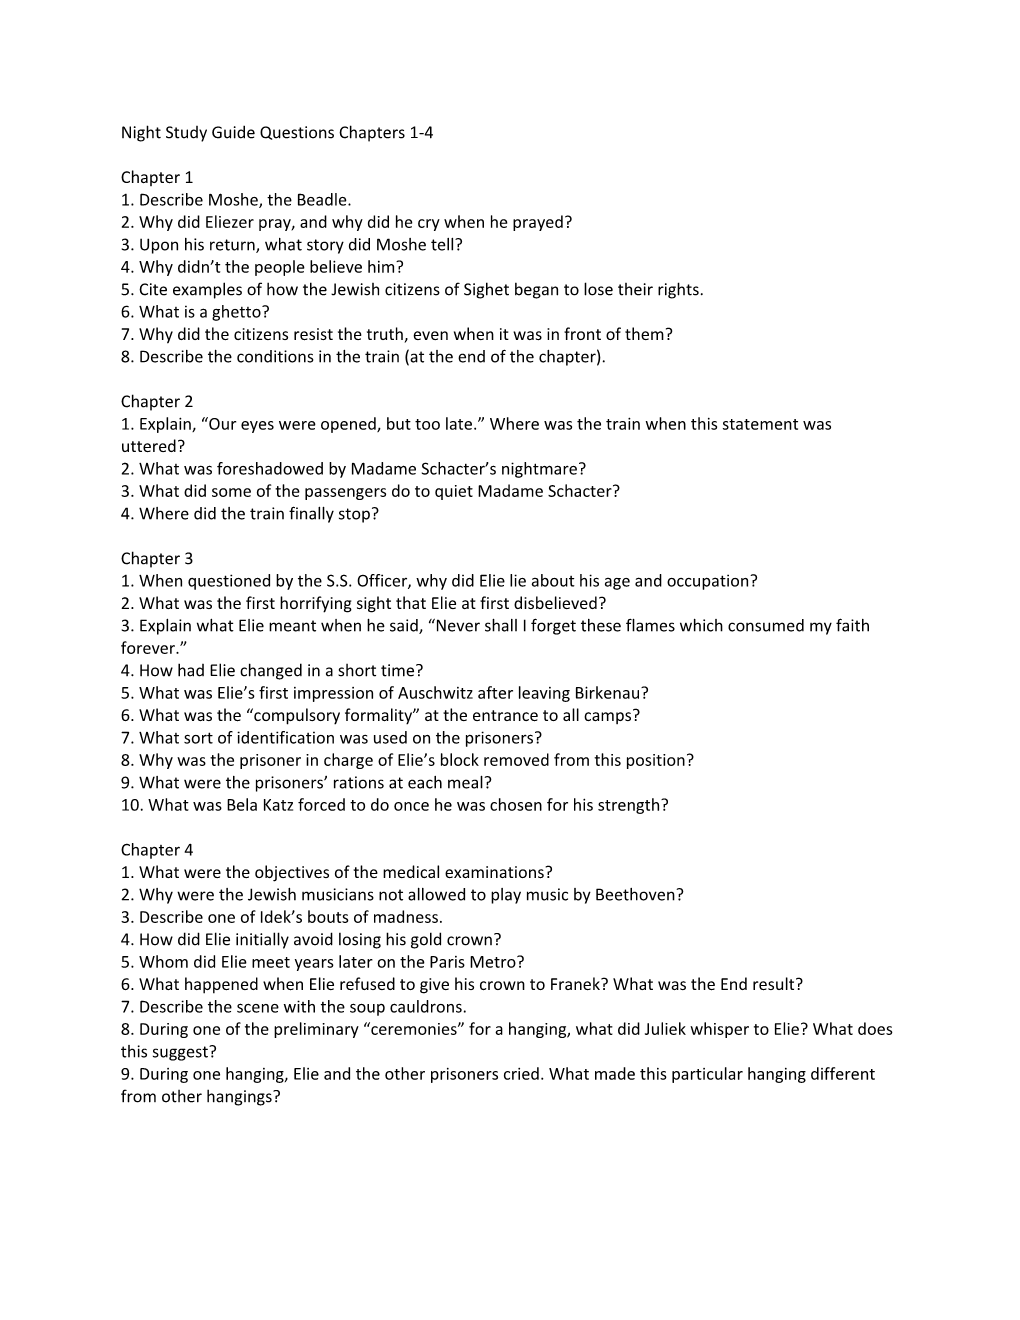 Night Study Guide Questions Chapters 1-4